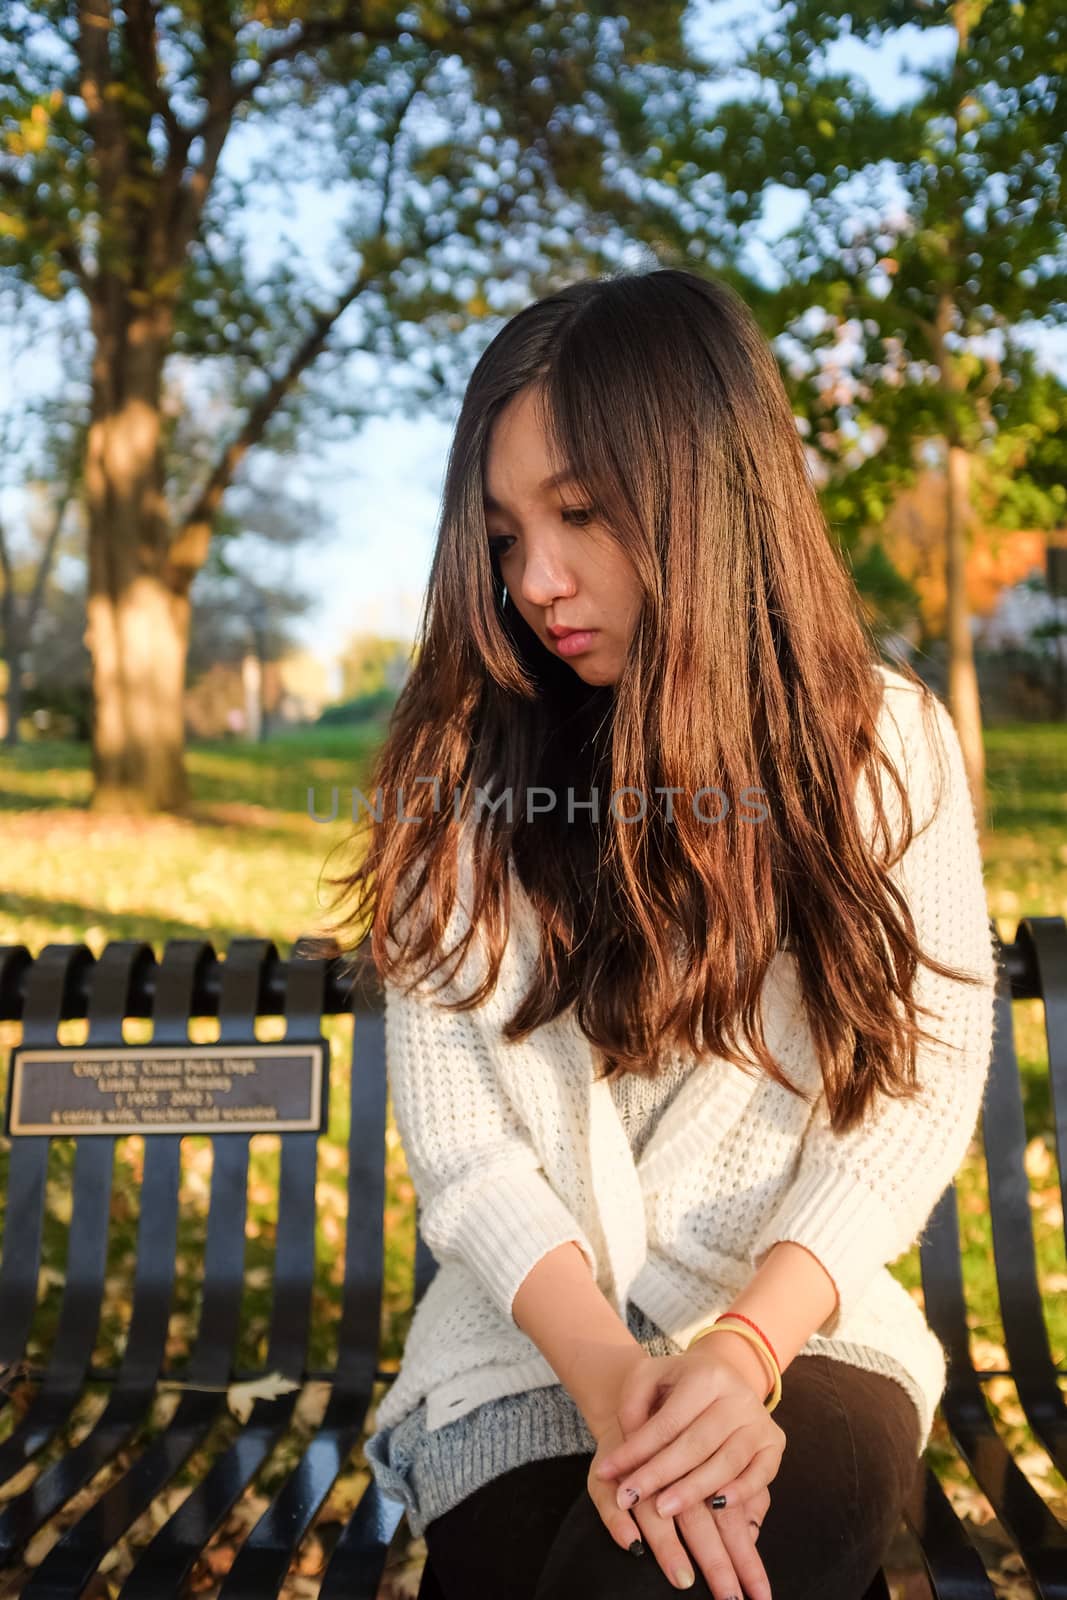 lonely young woman sitting on a steel bench